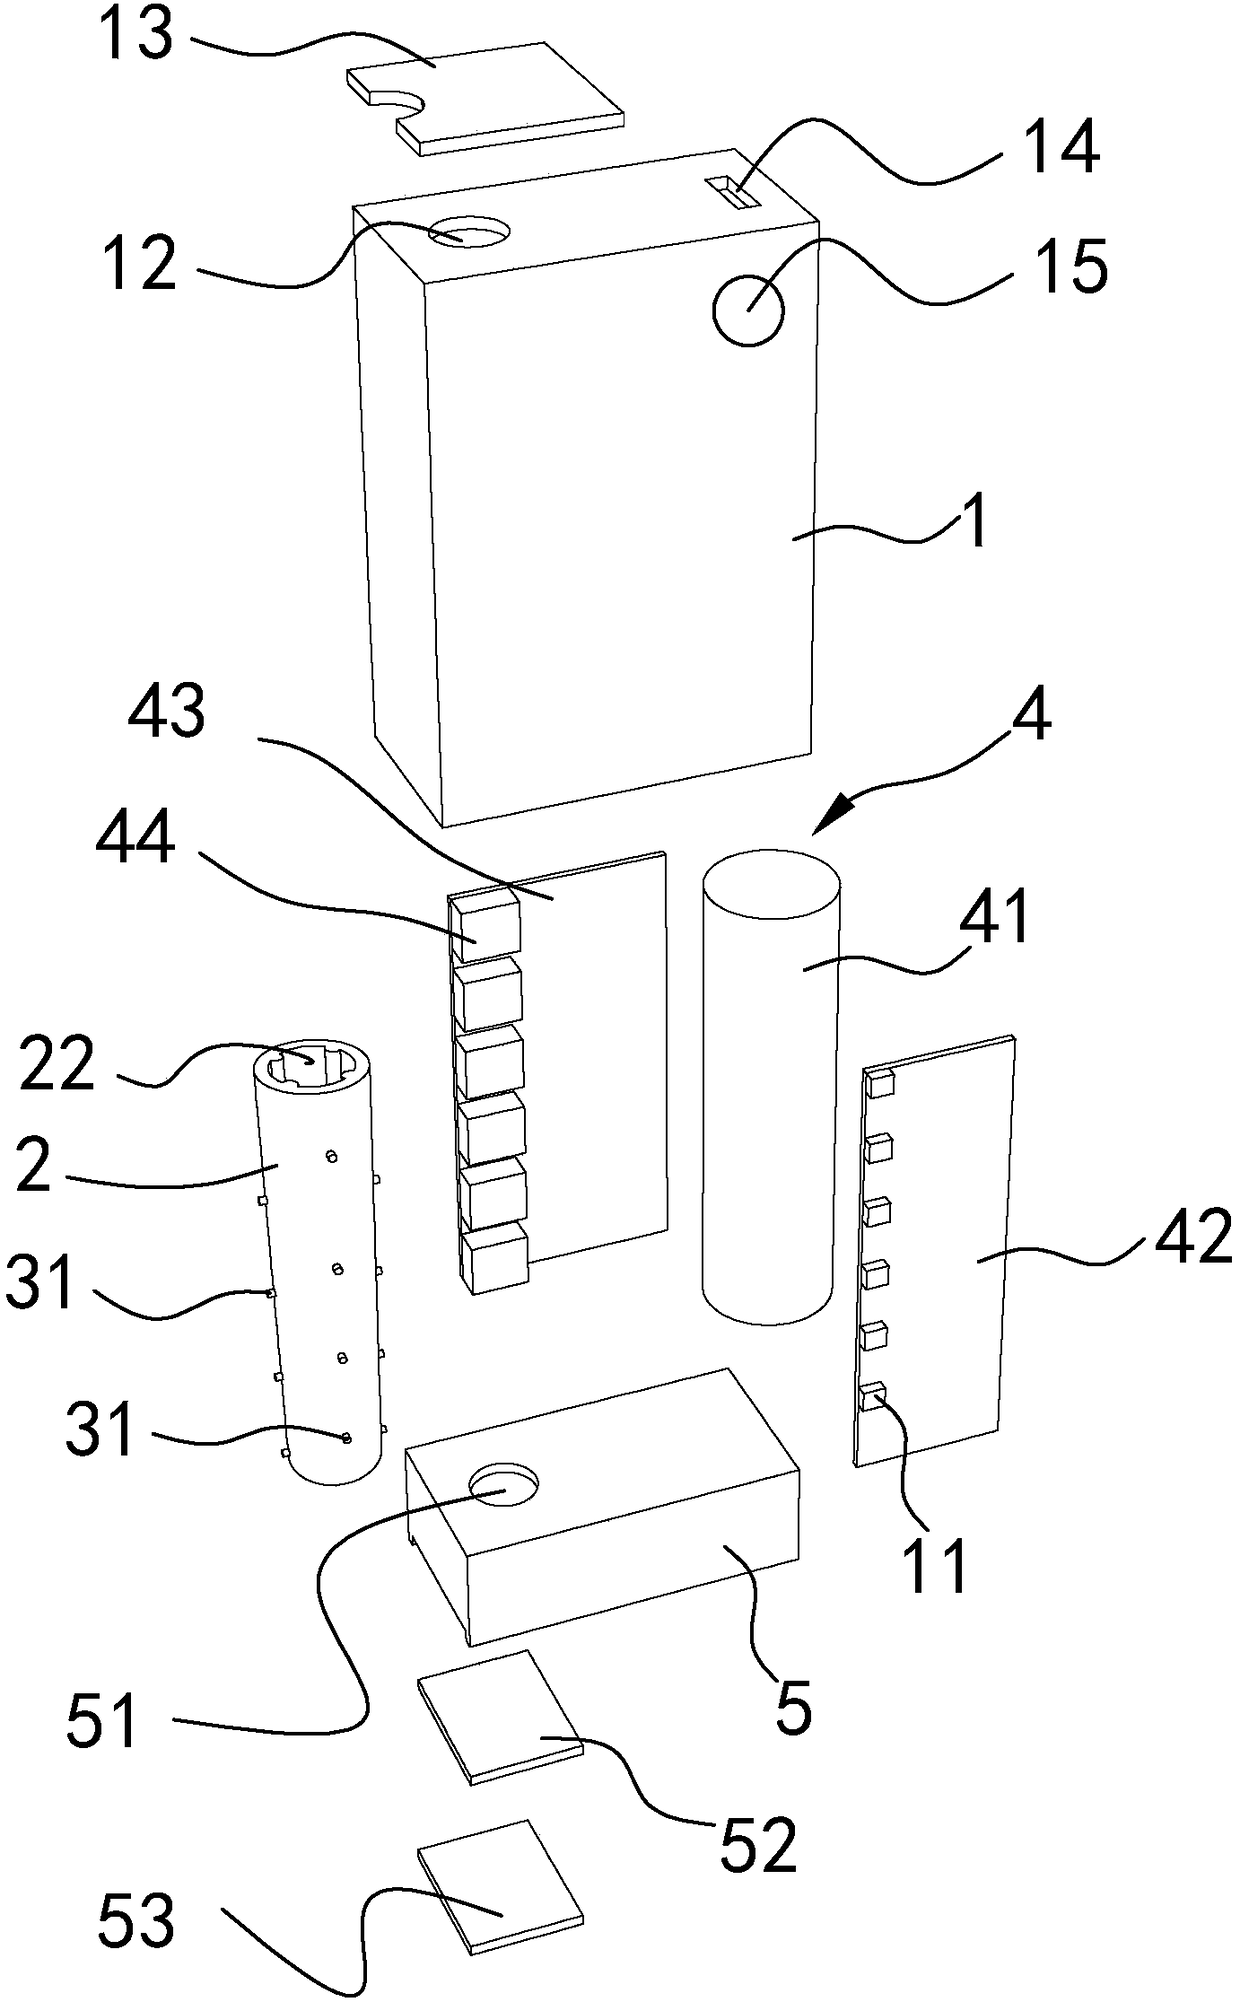 Device and method for smoking cigarettes